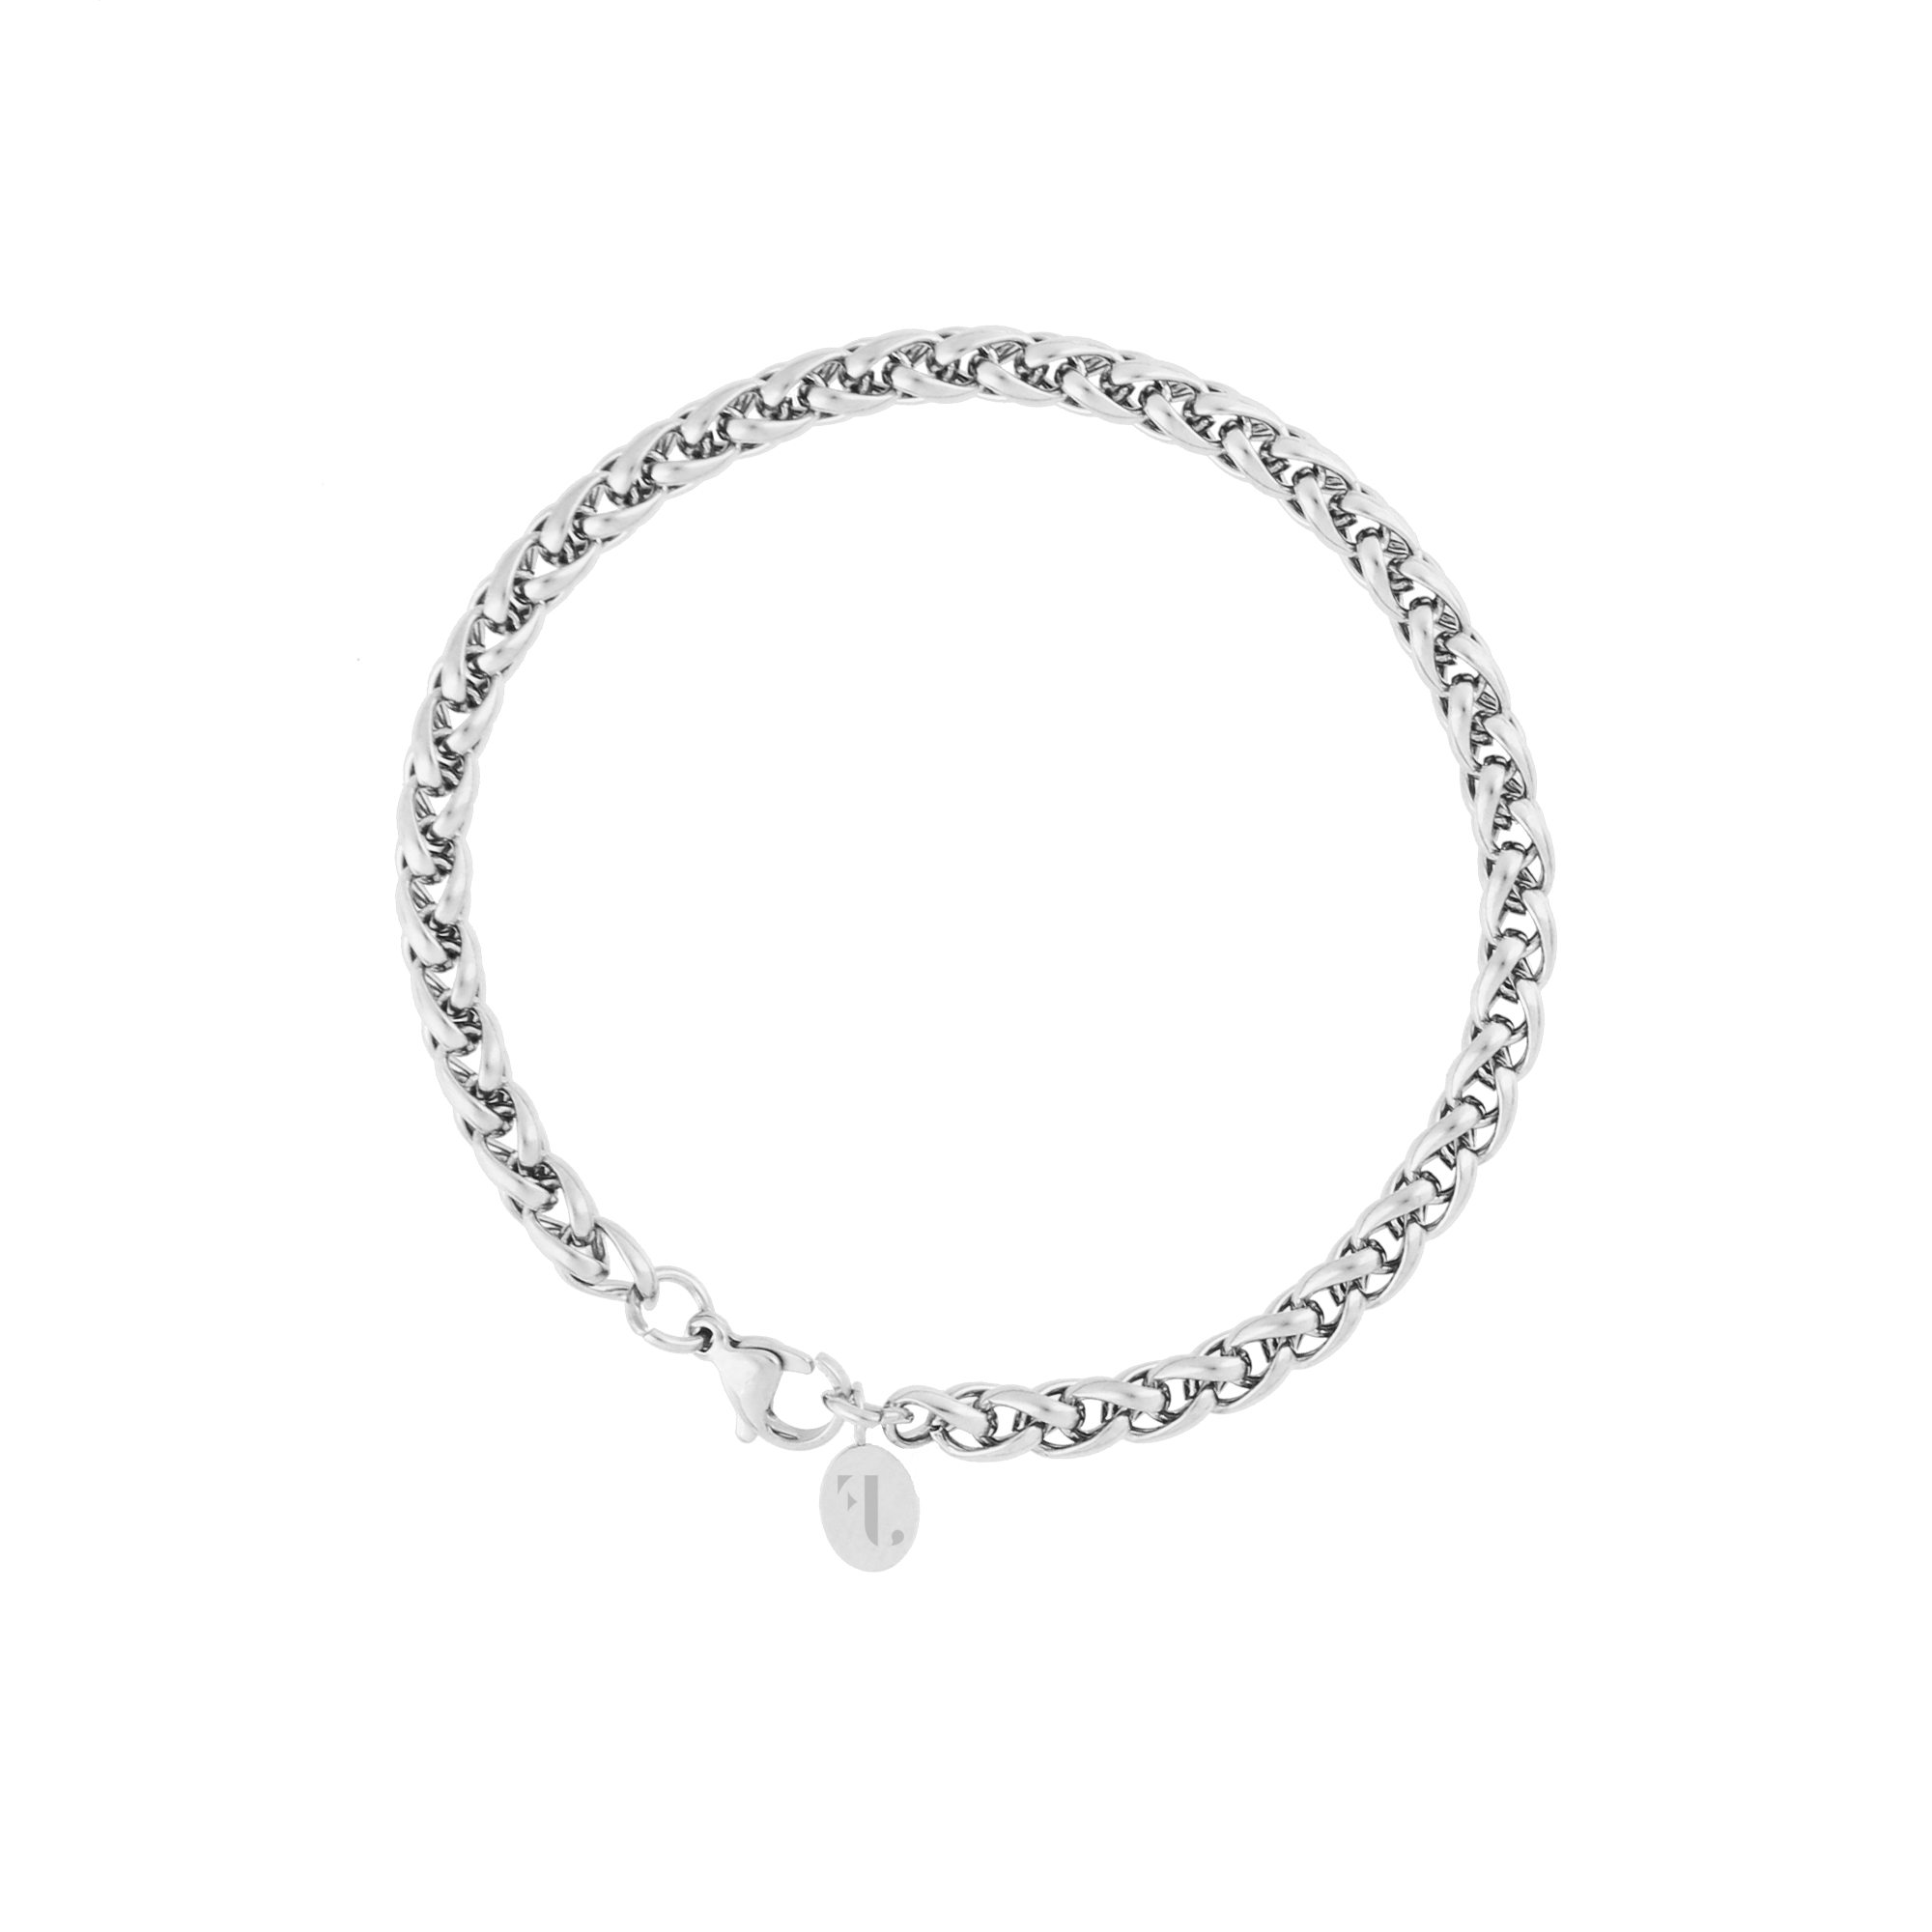 TAGE men's bracelet by Five Jwlry, designed with a 5mm wheat chain inspired by flower basket chains in silver-colored, water-resistant 316L stainless steel. Available in sizes 20cm and 23cm. Hypoallergenic with a 2-year warranty.